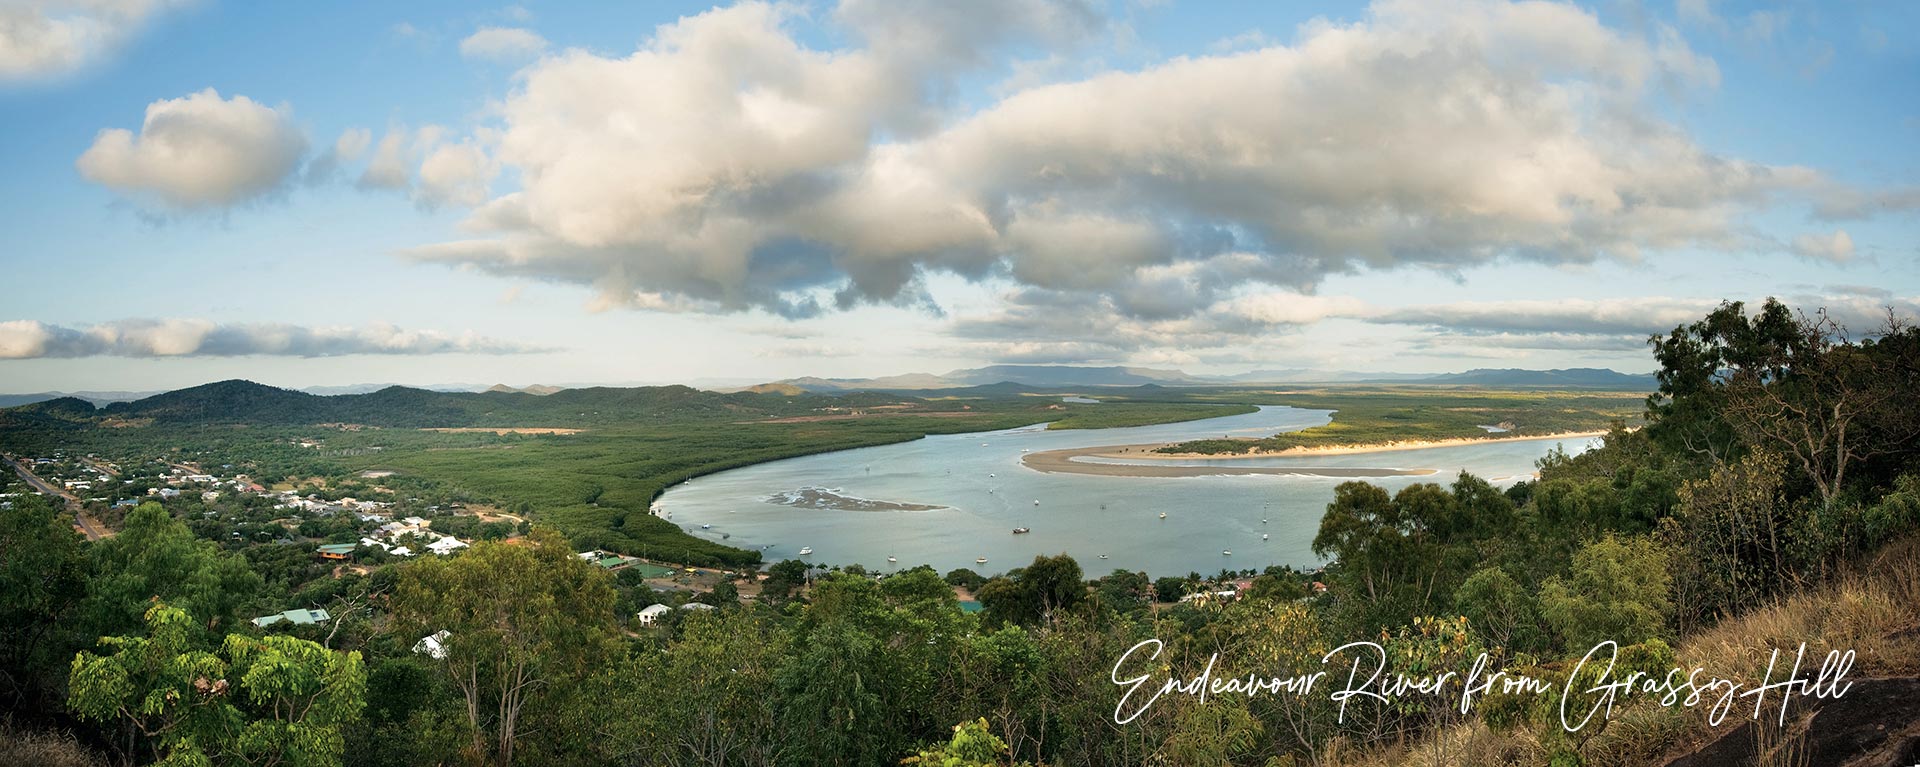 Endeavour River from Grassy Hill, Cooktown